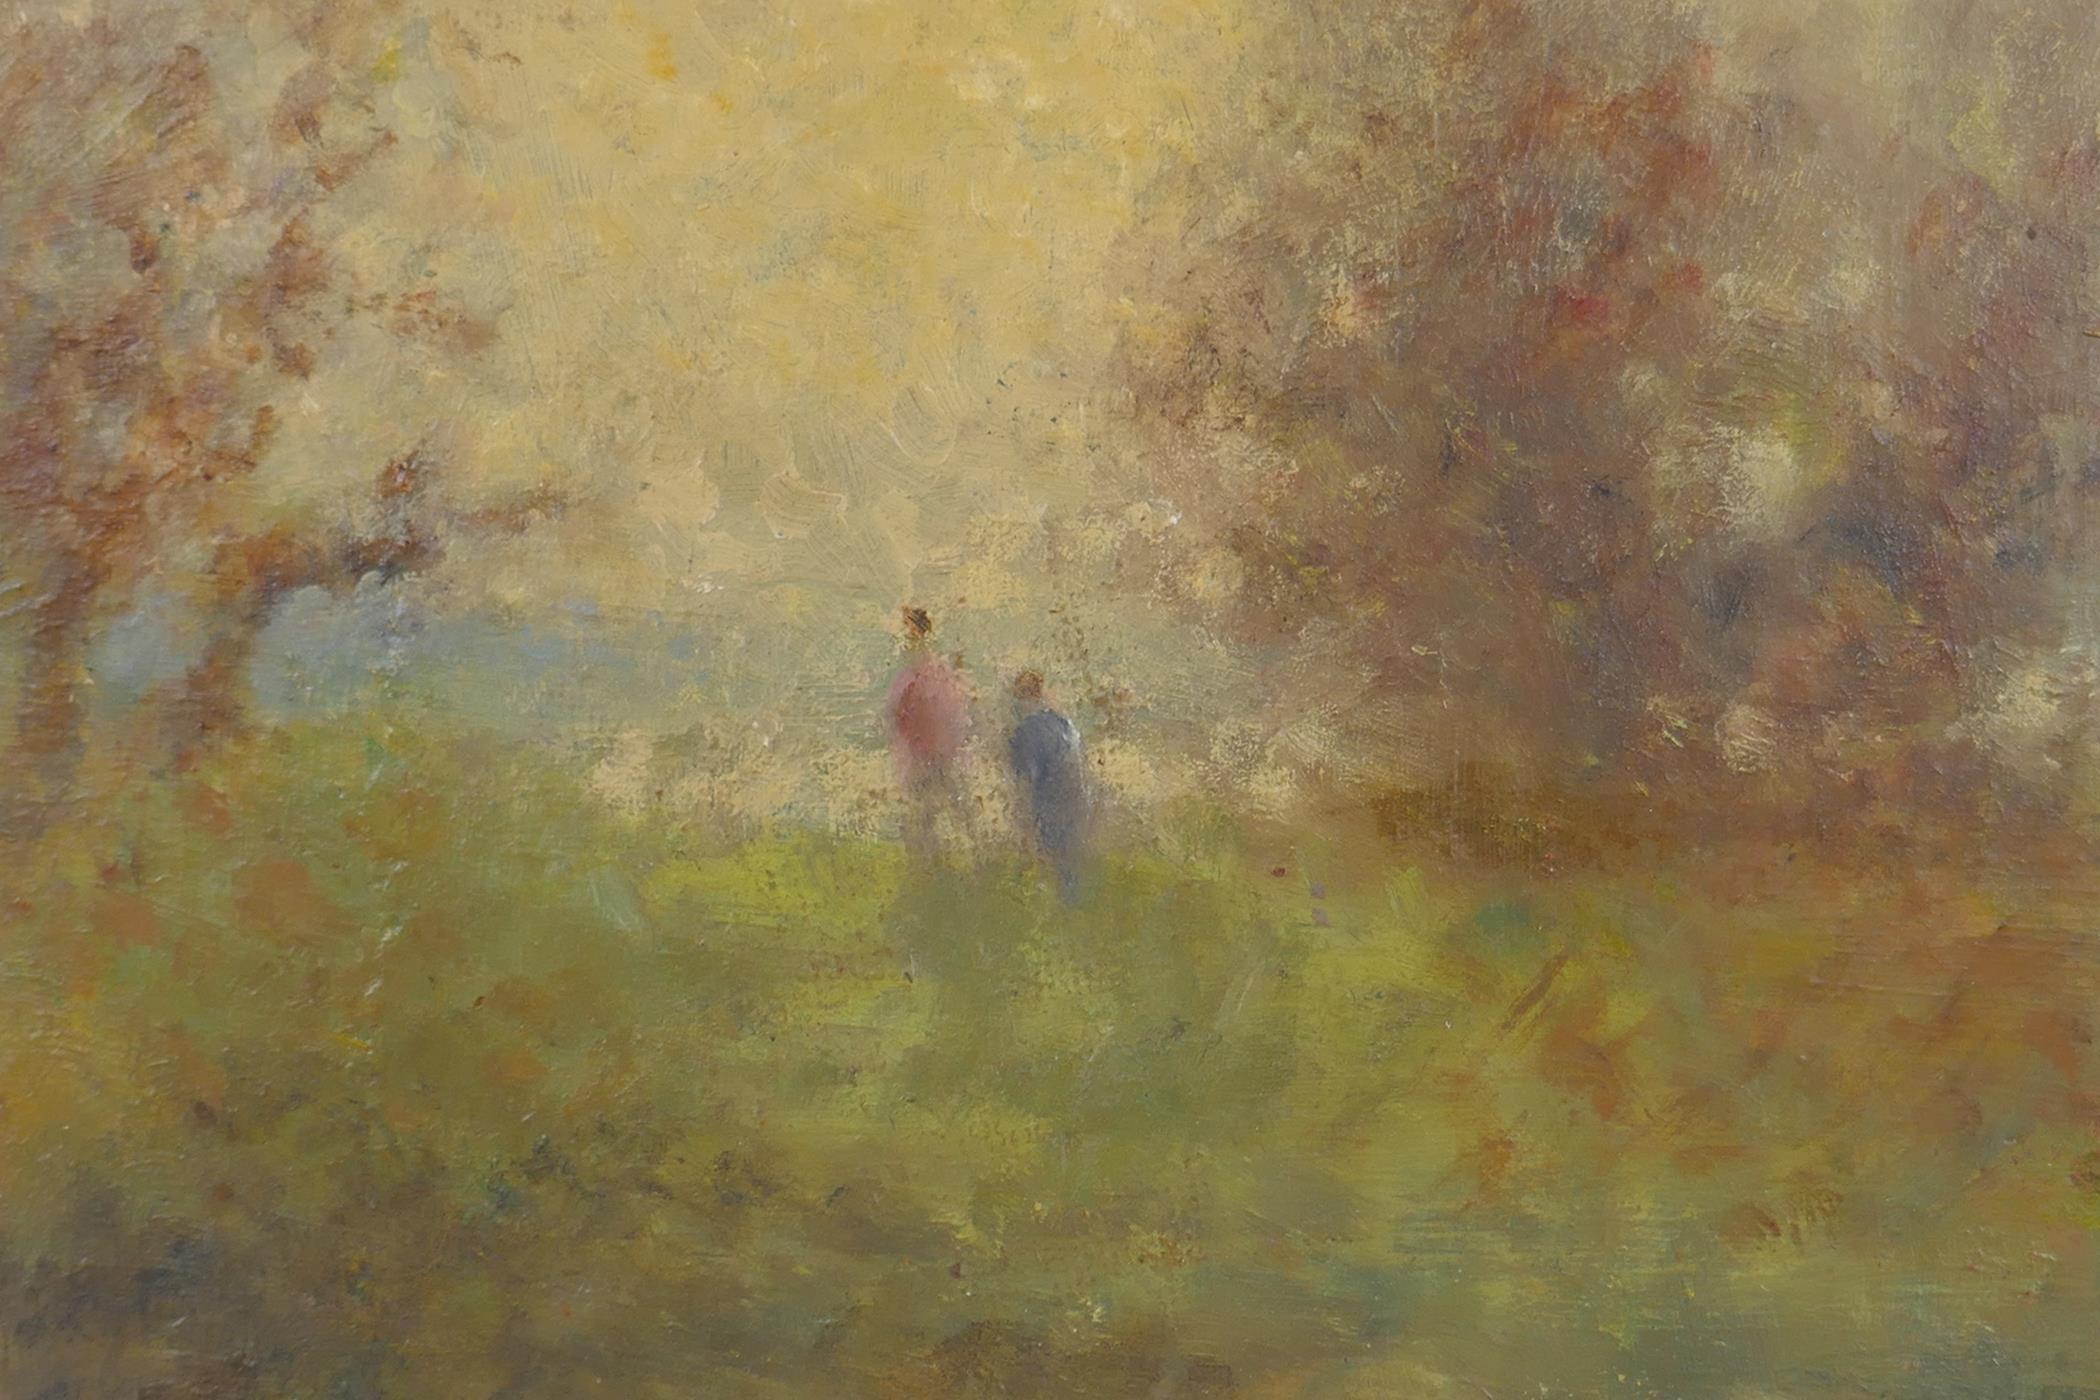 William Mason, figures by a woodland pond at sunset, monogrammed, oil on board, 19 x 25cm